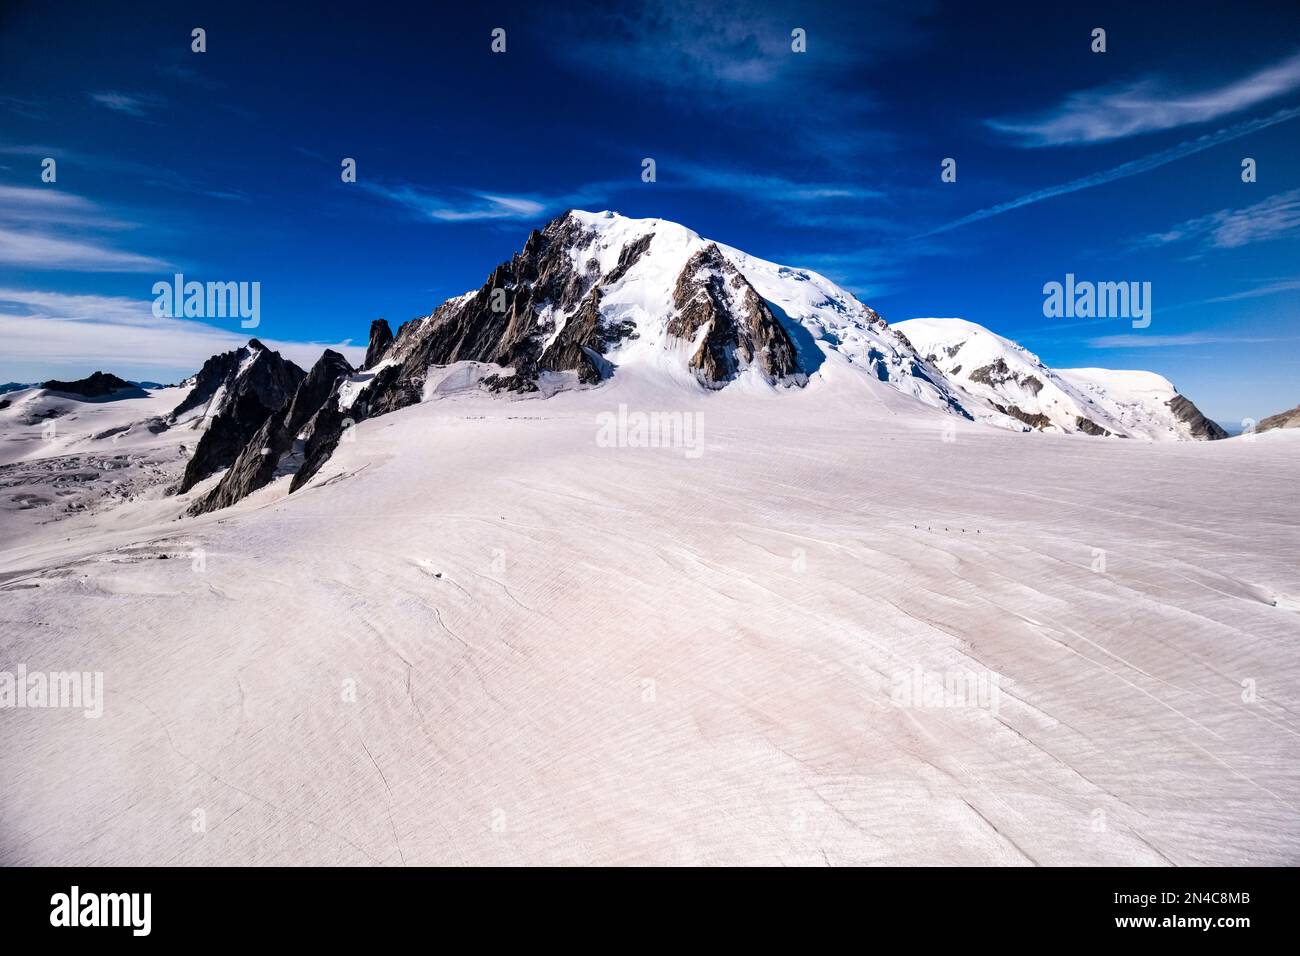 Alpinists crossing the upper part of the Géant Glacier, the summits of Mont Blanc du Tacul, Mont Blanc and Dome du Goutier in the distance. Stock Photo